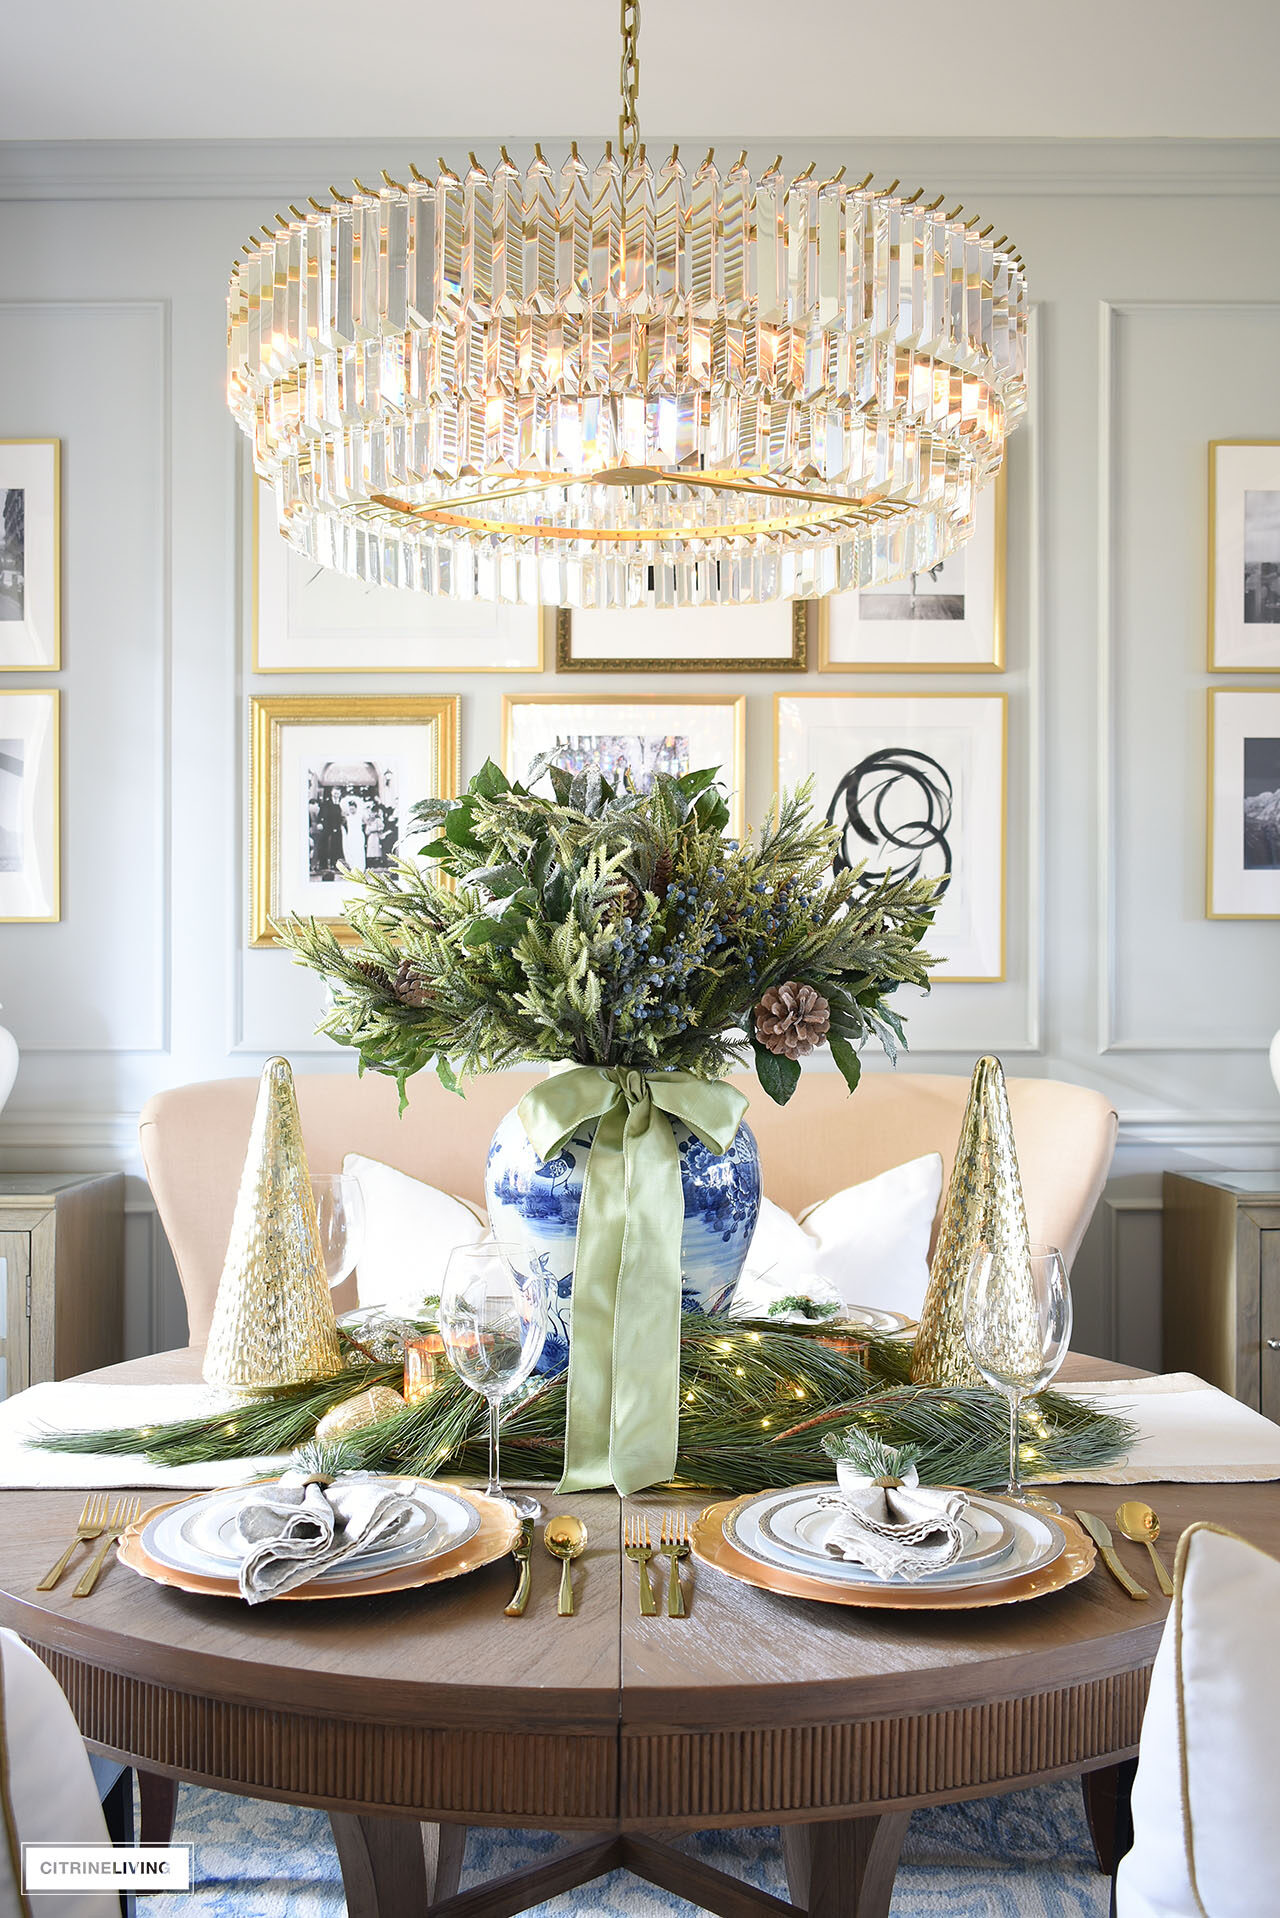 Dining room table set for Christmas with silver and gold dishes and holiday greenery